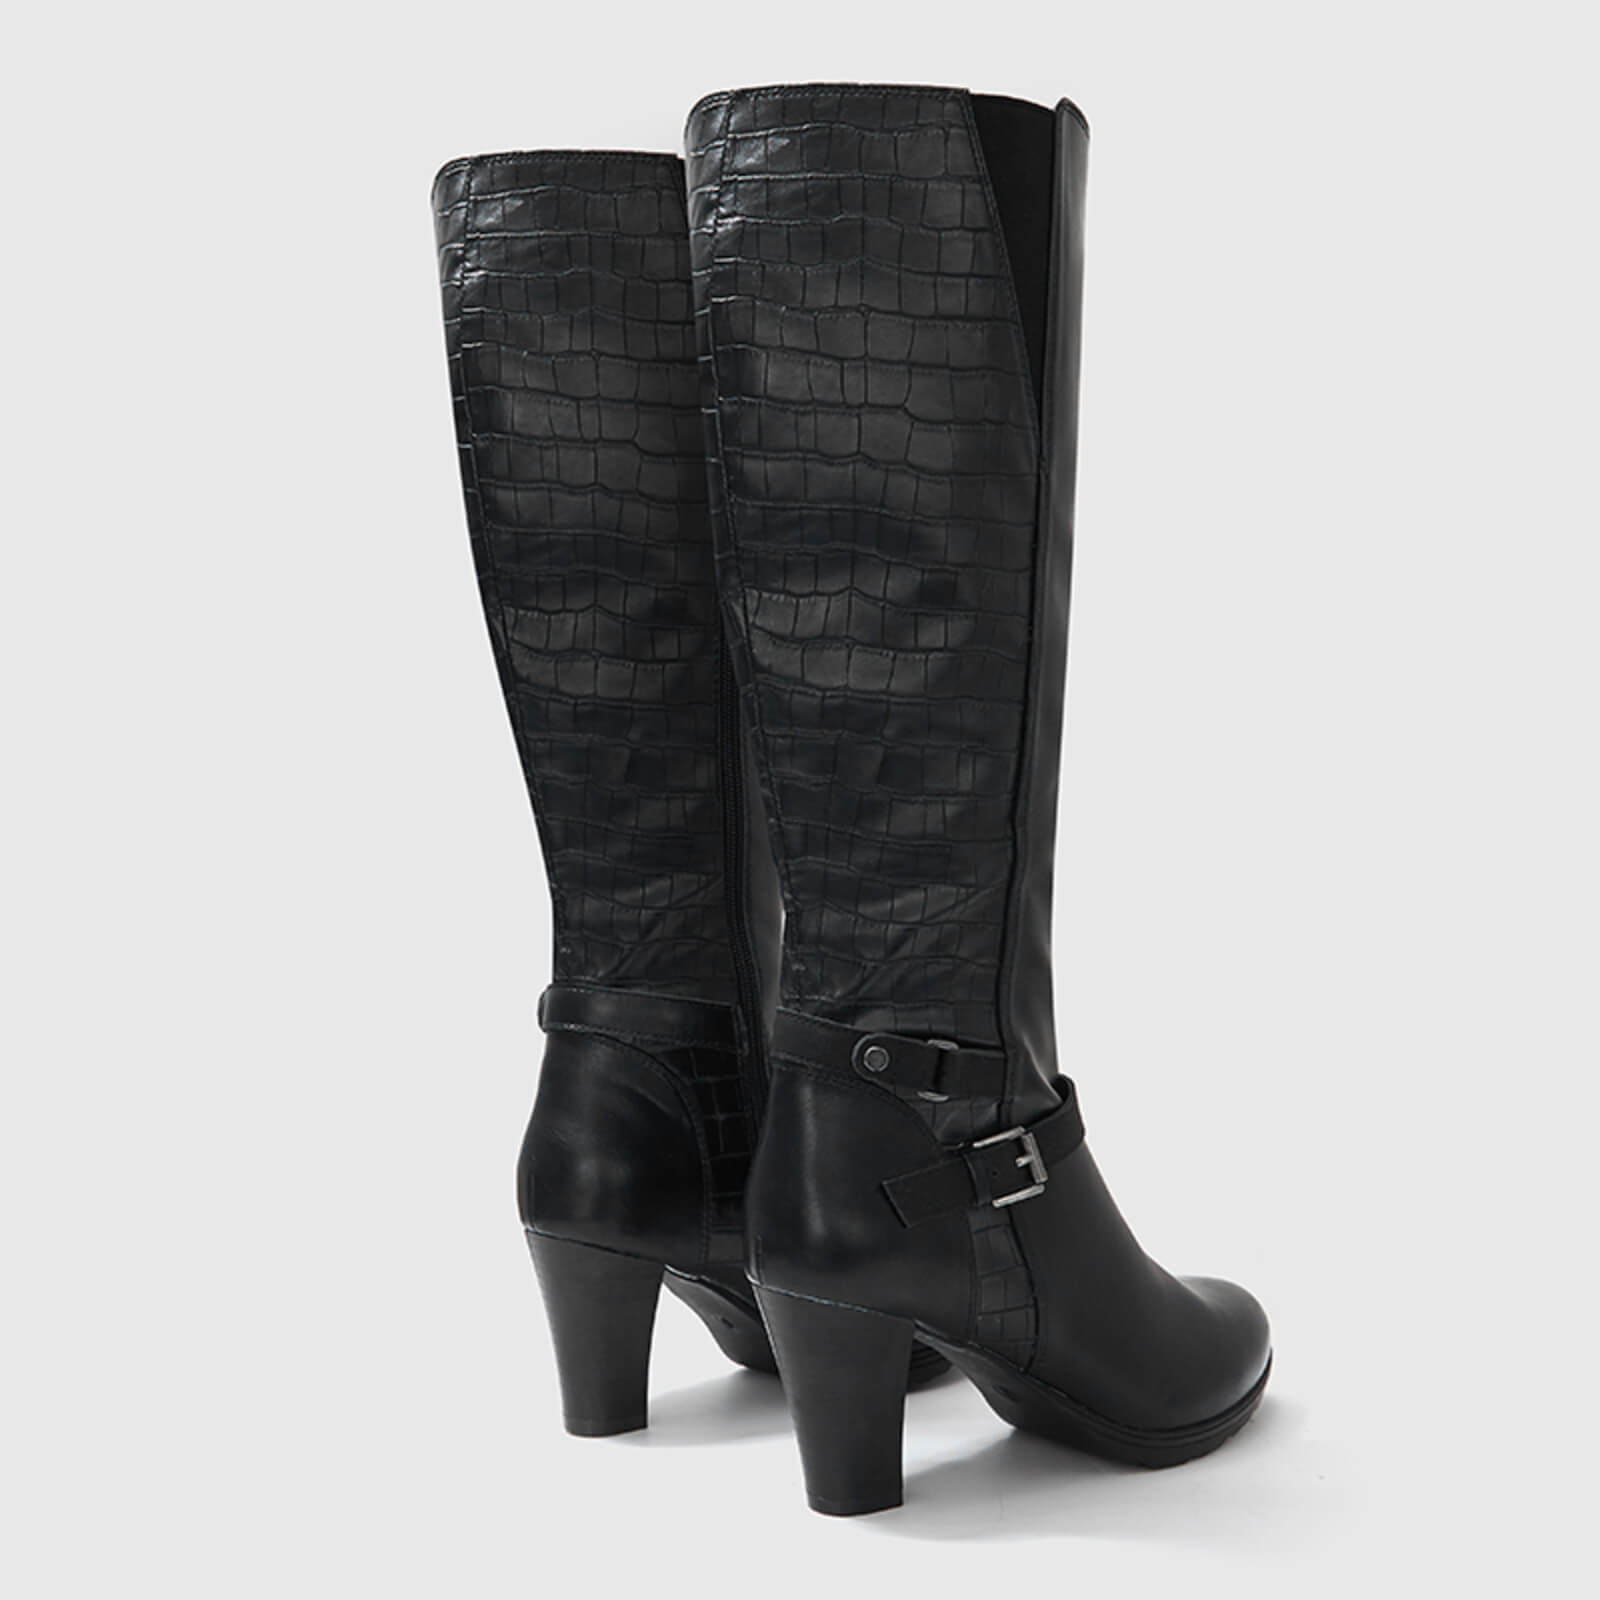 Crocodile Pattern Knee High Boots with Zipper